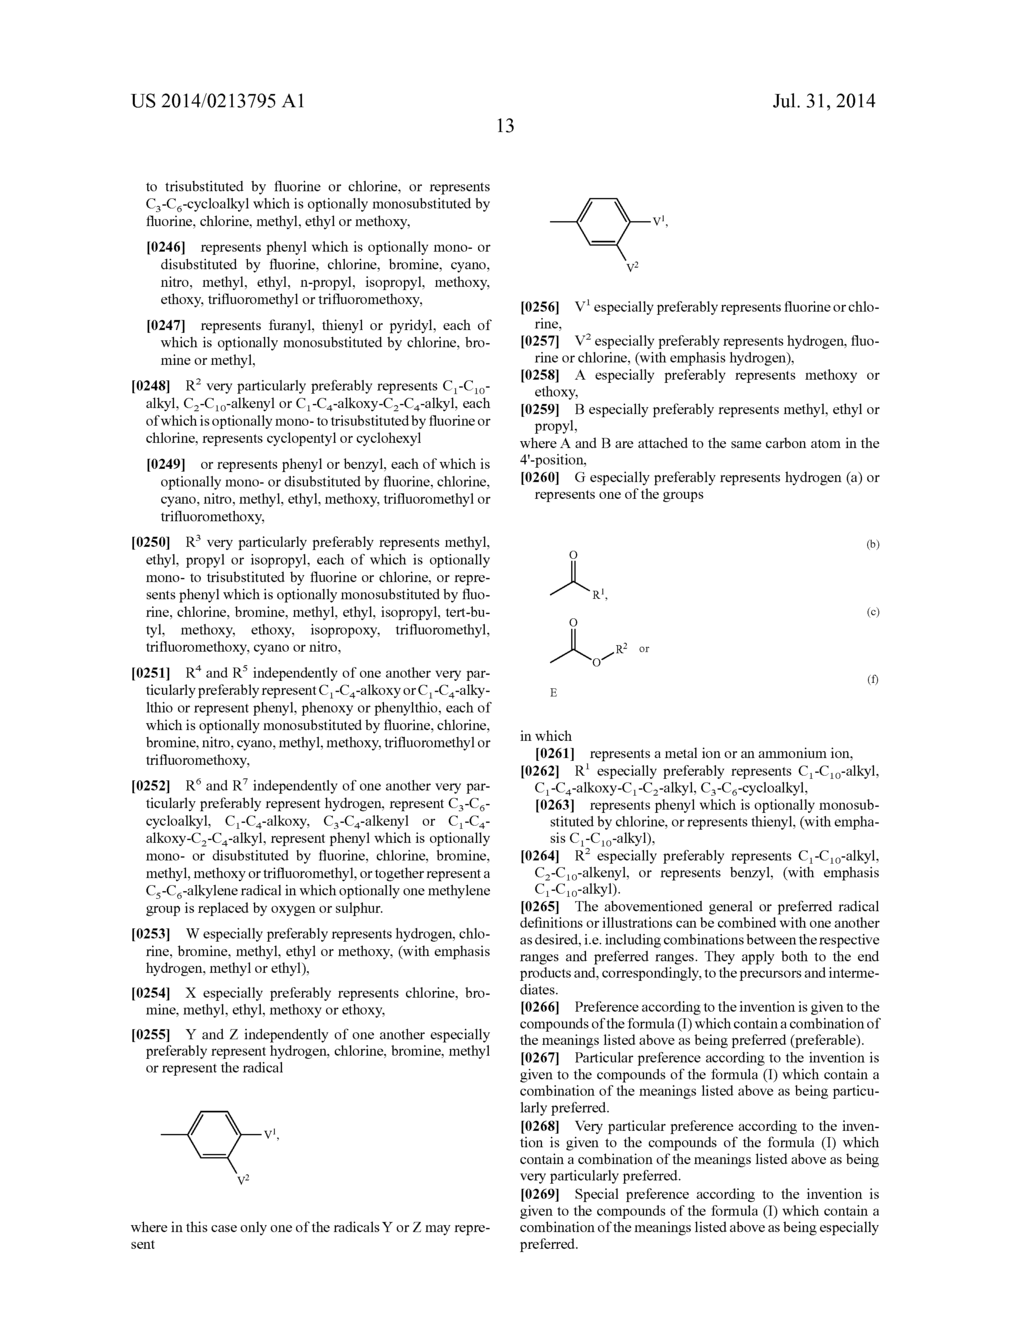 GERMINAL ALKOXY/ALKYLSPIROCYCLIC SUBSTITUTED TETRAMATE DERIVATIVES - diagram, schematic, and image 14